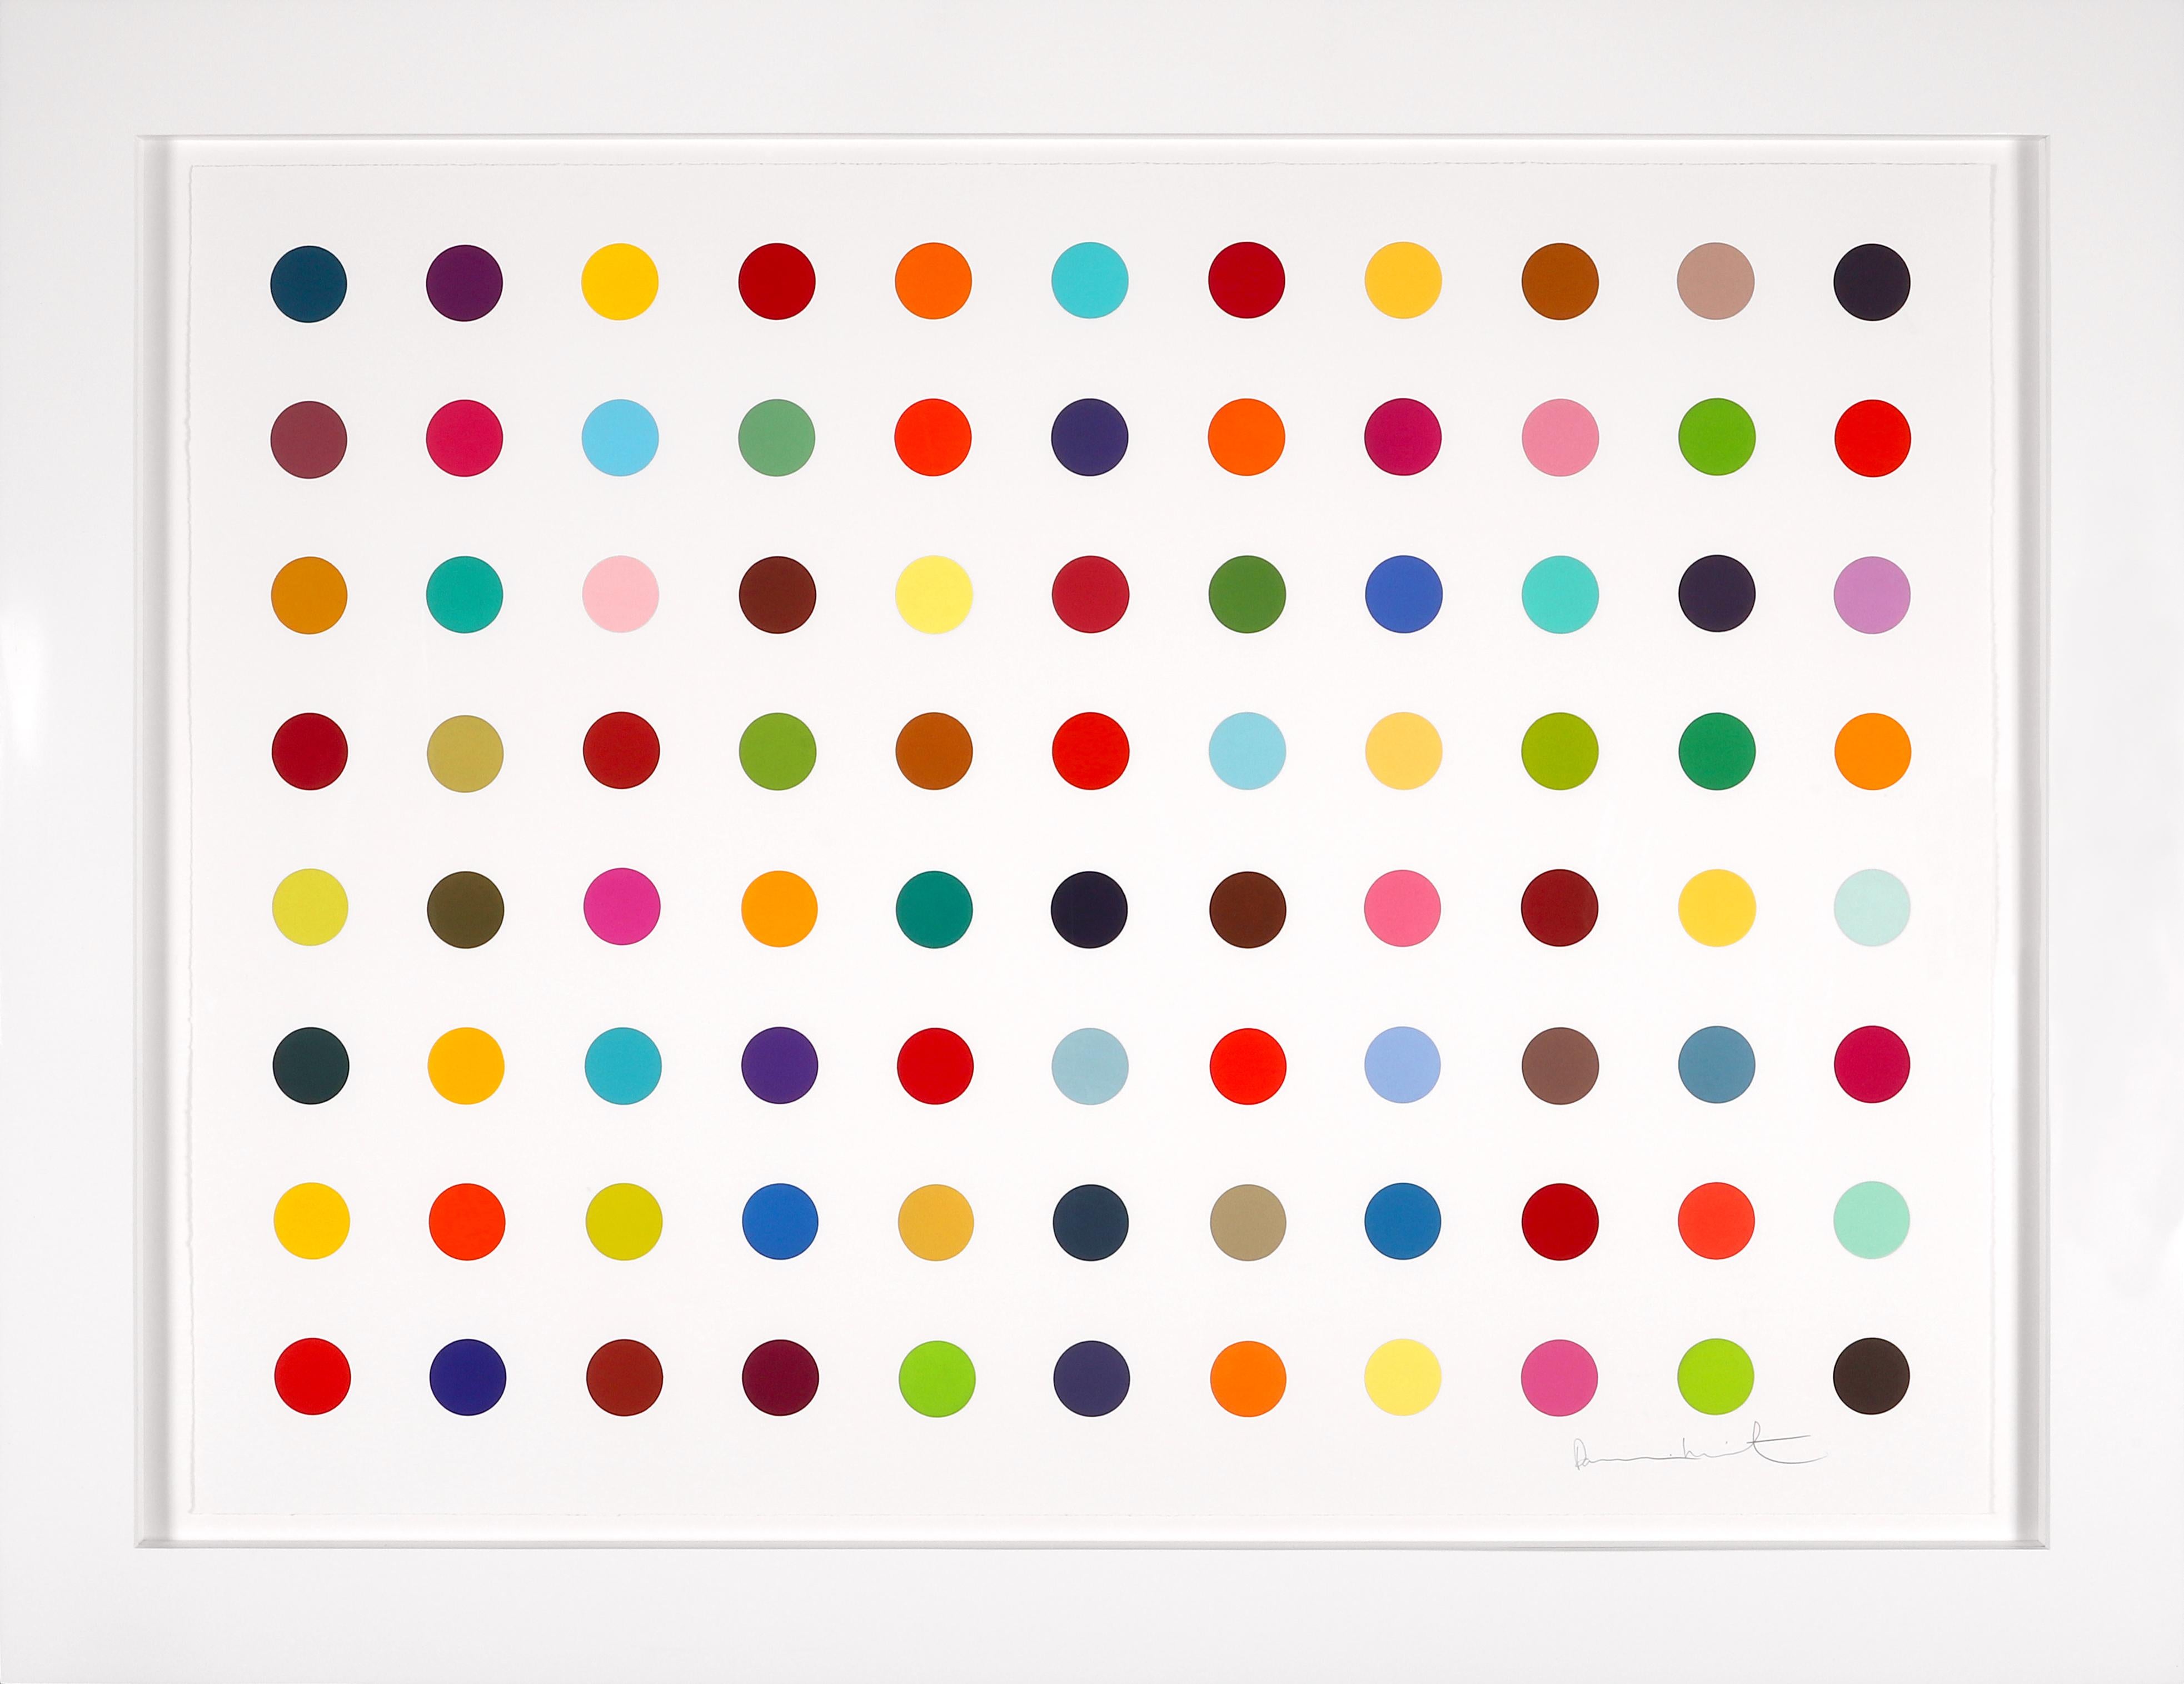 'Horizontal 'Spots' I Spots Woodcut Print, 2018 is an edition of 55, number #45 of edition. Signed by the Artist on front in pencil. Part of Damien Hirst's 2018 Woodcut series. The sheet measures 34.4 x 45 x 75 in. / 87.4. x 114.3, The framed